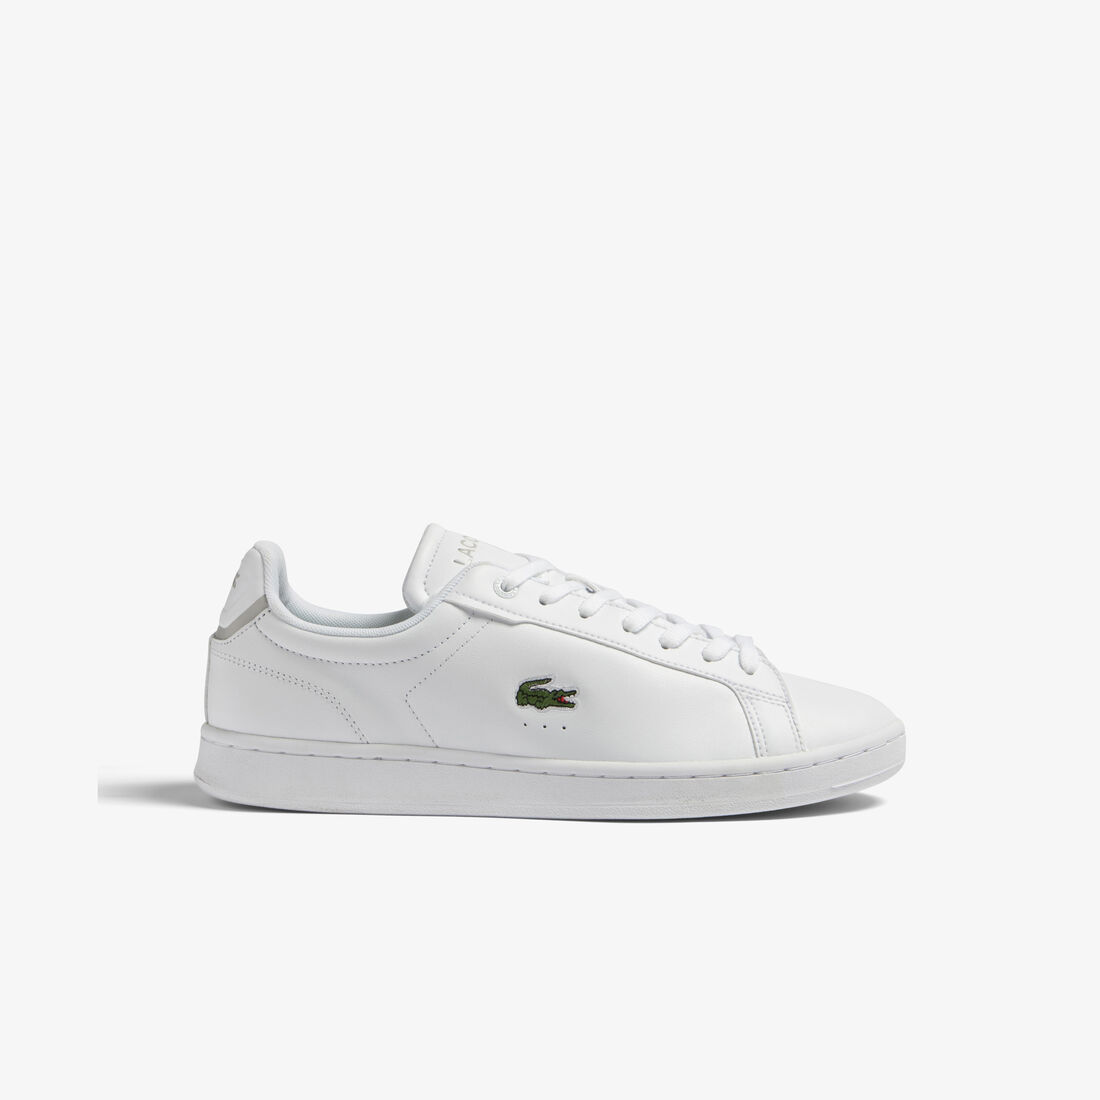 Men's Lacoste Carnaby Pro BL Leather Tonal Trainers - 45SMA0110-21G